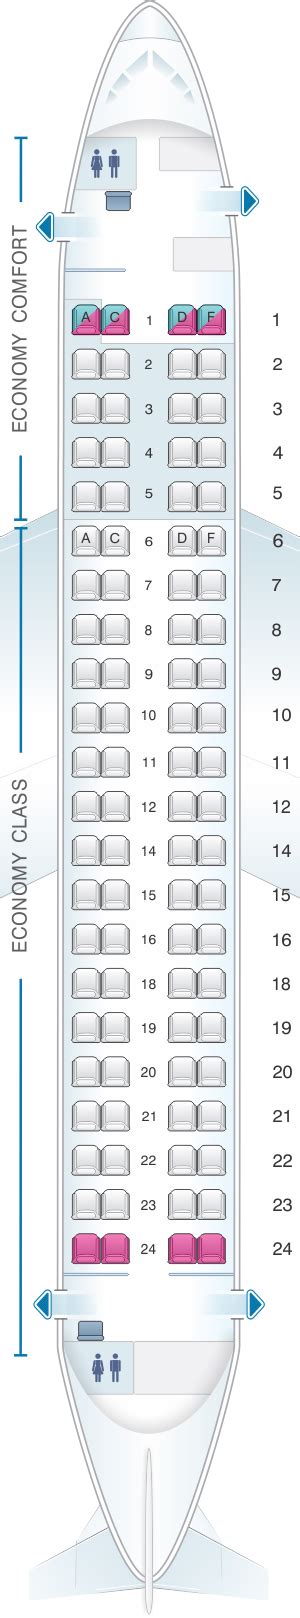 United Embraer 175 Seat Map